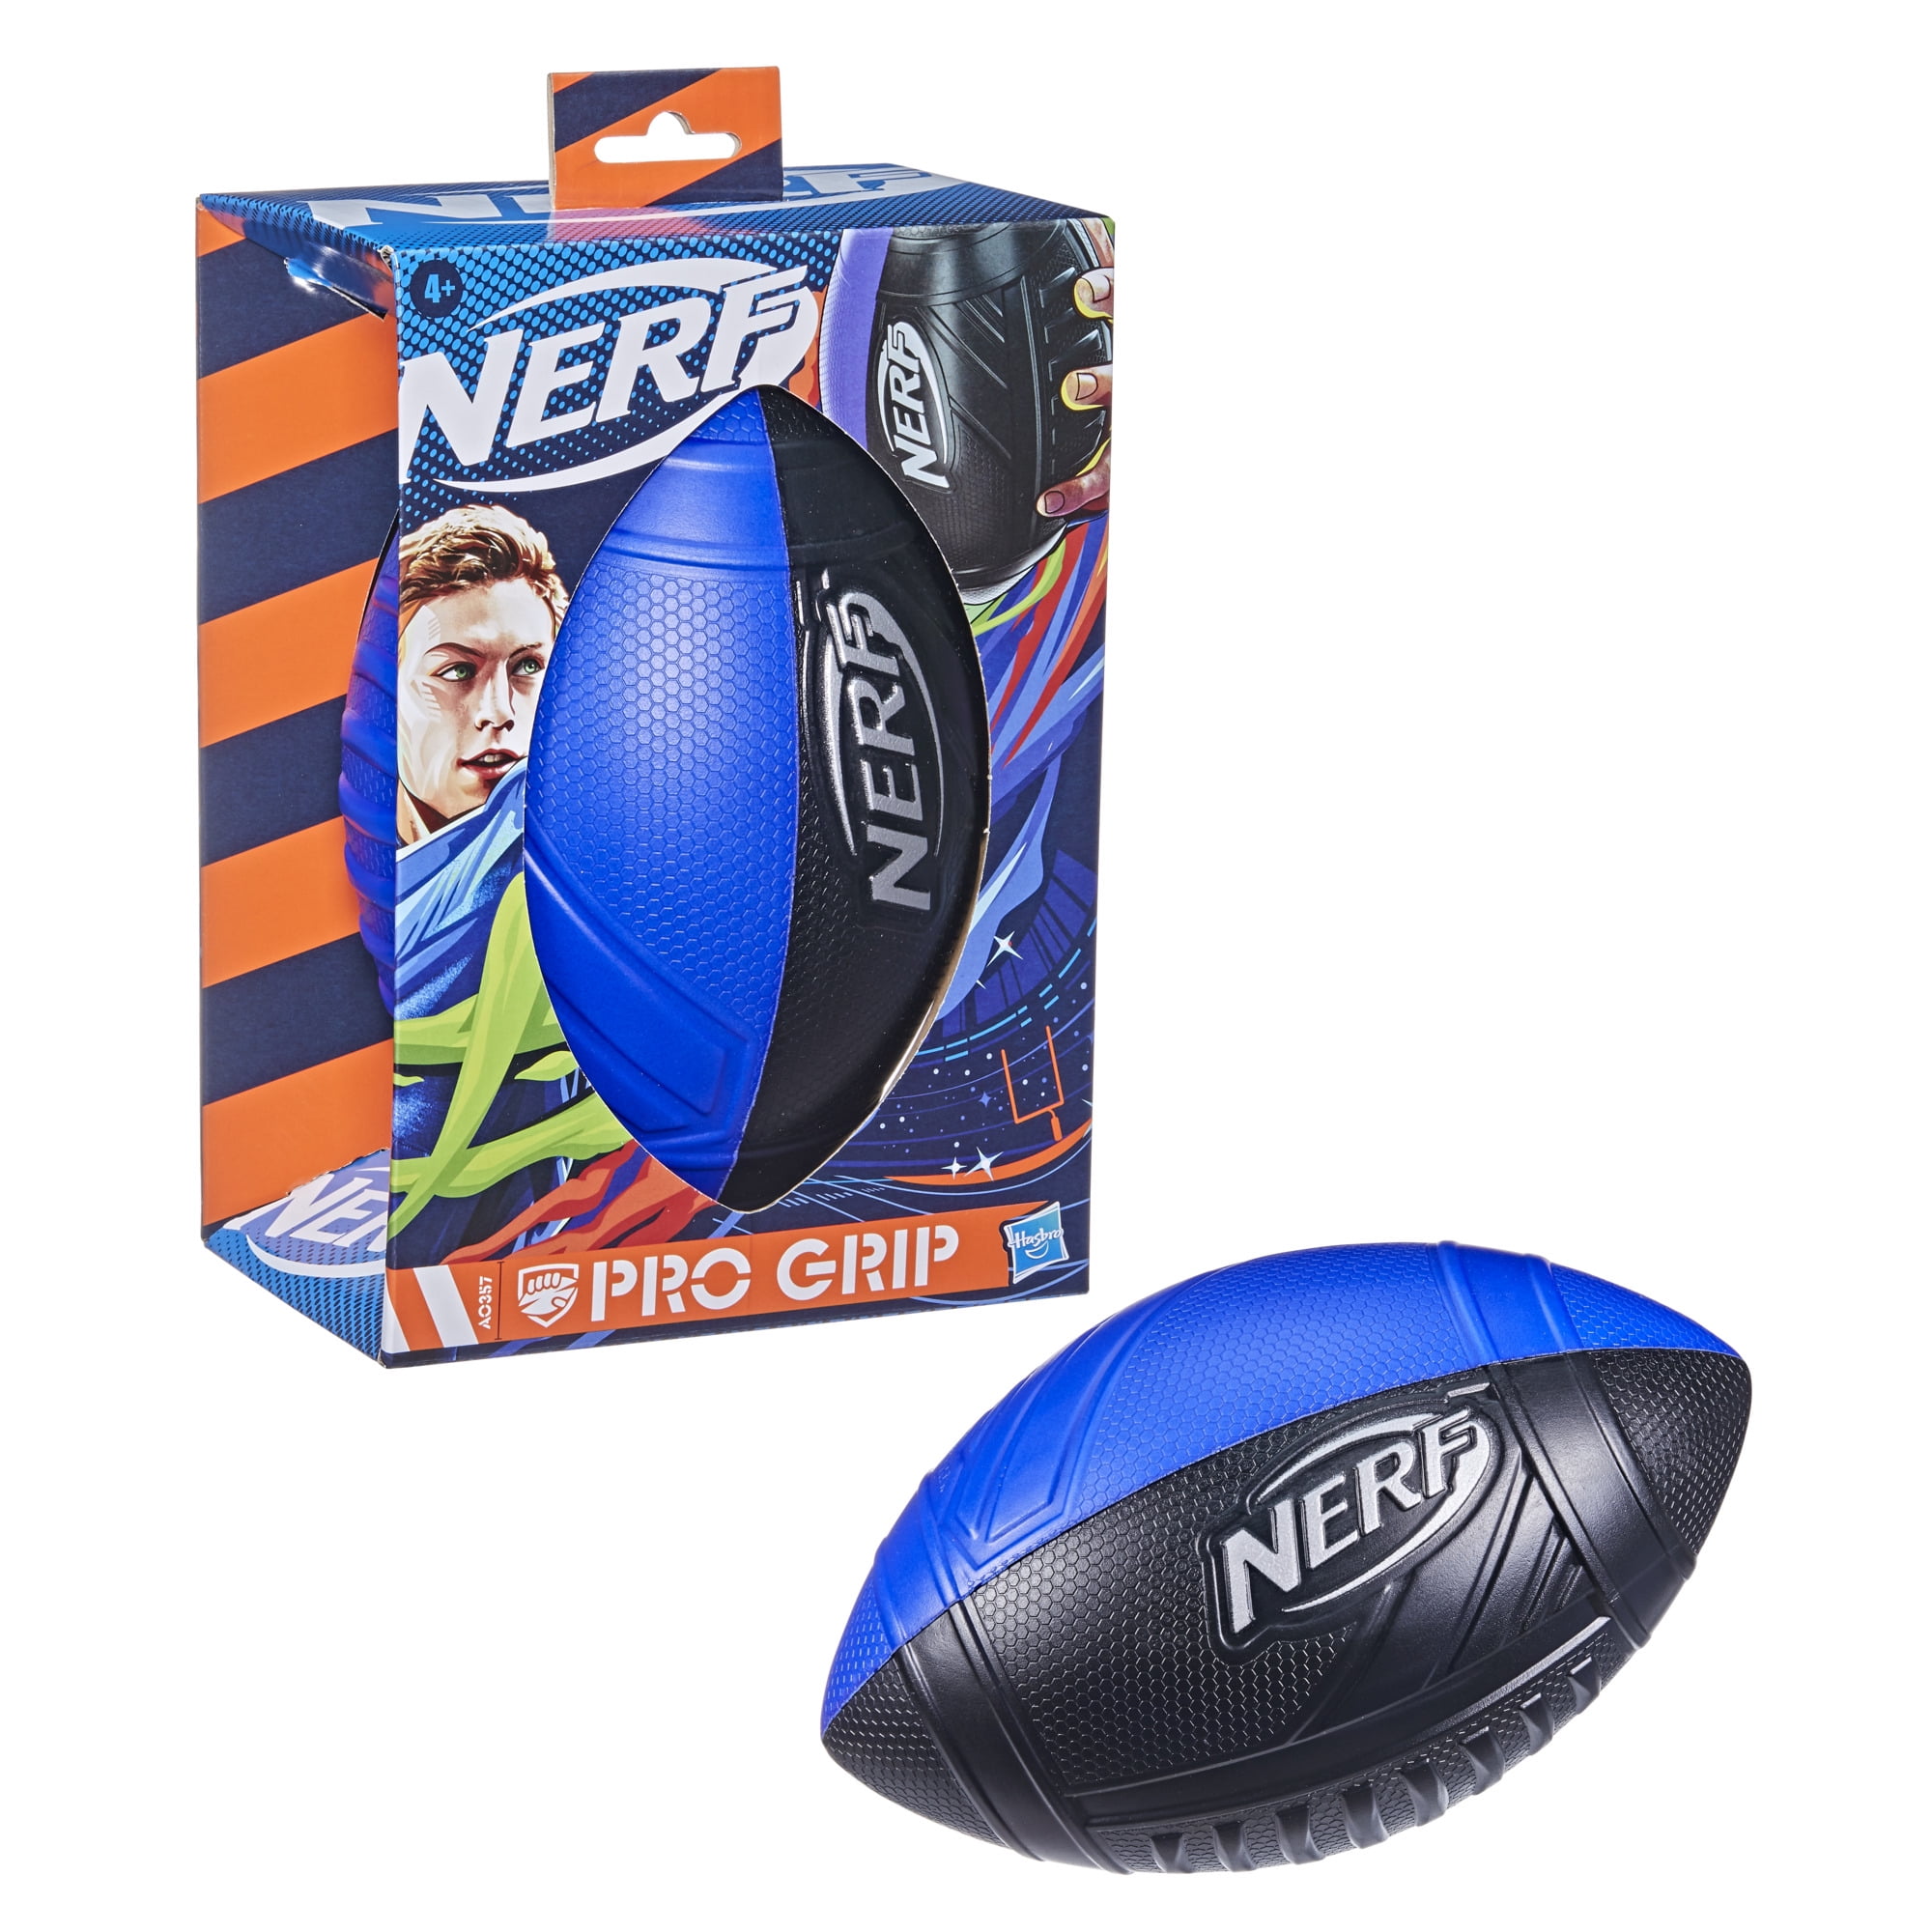 Details about   NERF Pro Grip Football Classic Foam Ball Easy to Catch and Throw Feb.1,21 New